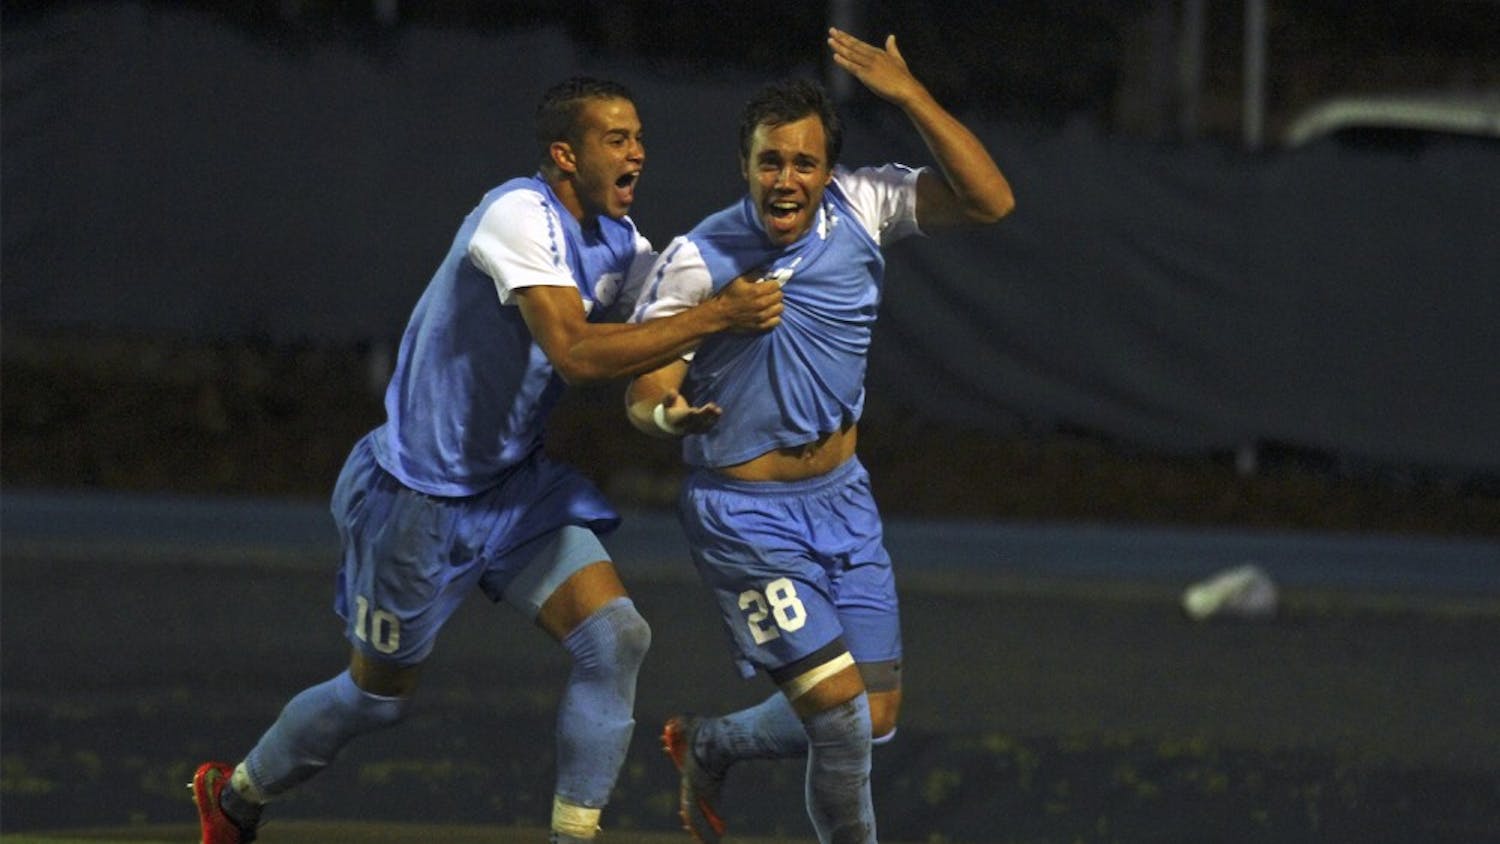 UNC Mens Soccer Game v. Duke with a 2-1 Victory: Forward Zach Wright (10) and Midfielder Alex Olofson (28) celebrates Olofson's goal which came within the first five minutes of play to put UNC up 1-0